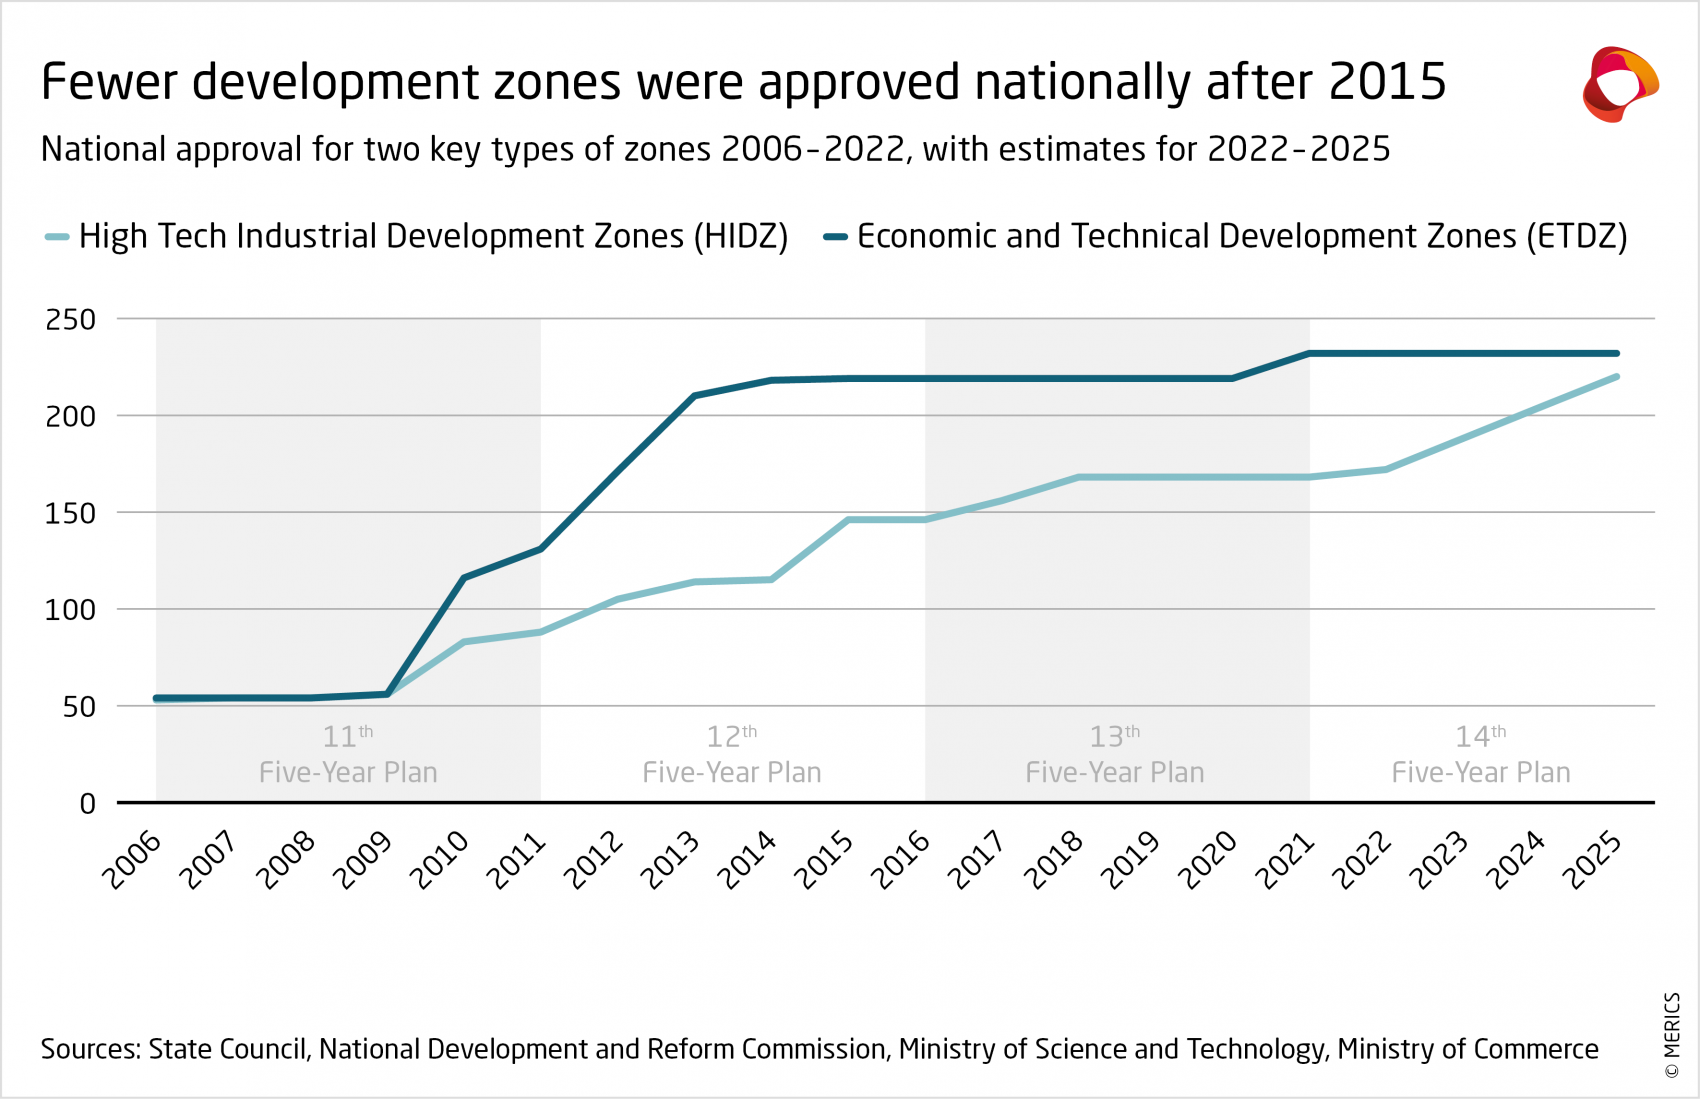 National approval for two key types of zones 2006-2022